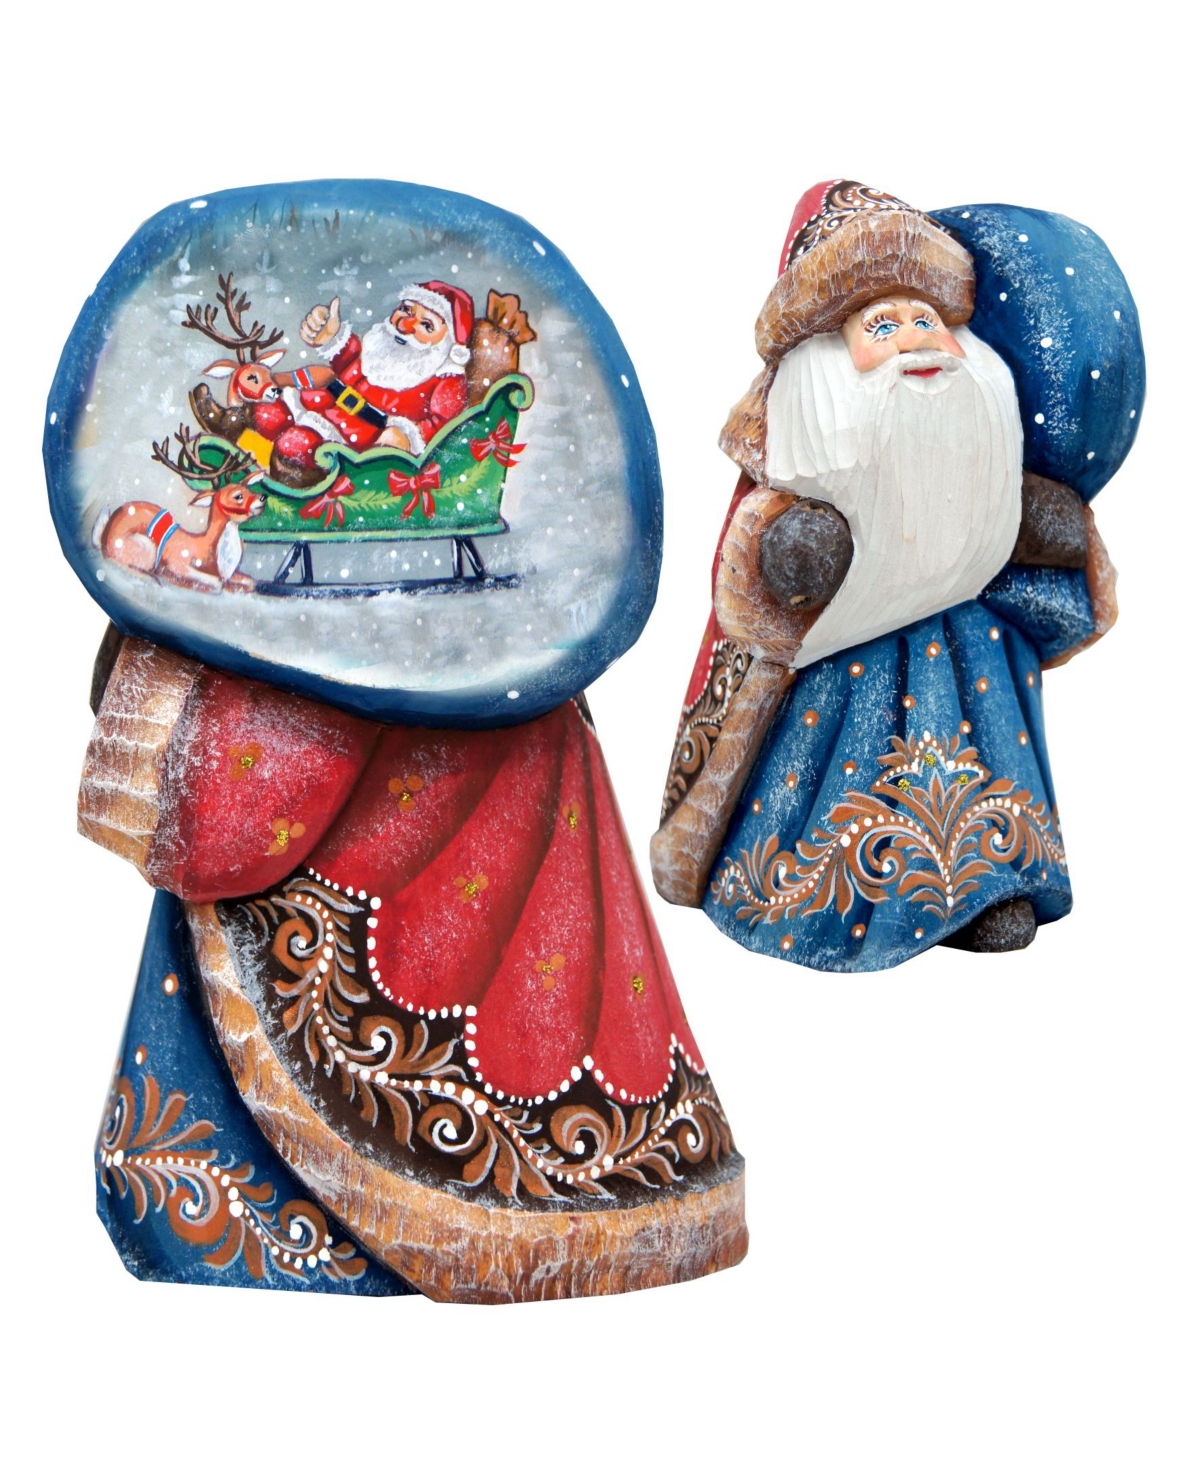 Woodcarved and Hand Painted Santa Enjoy The Moment Figurine with Bag - Multi